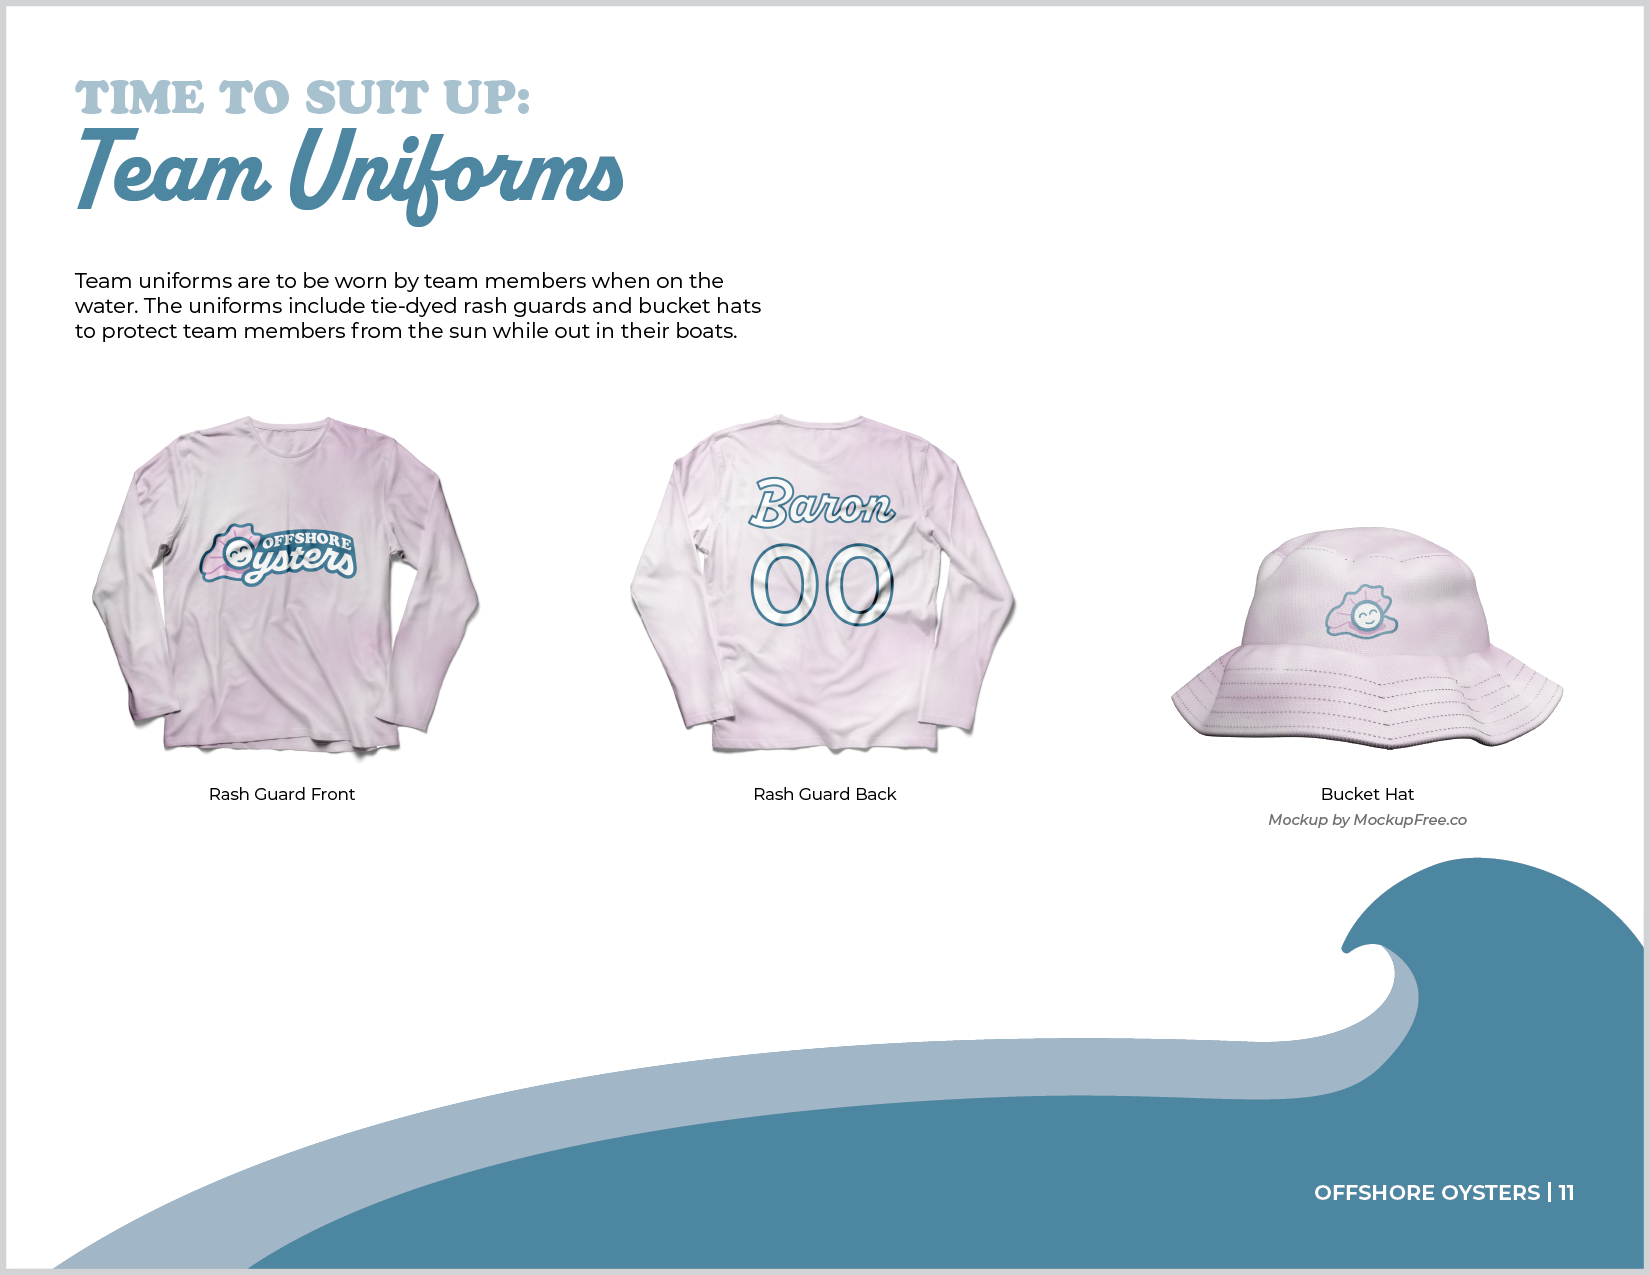 Offshore Oysters brand guideline team uniforms.